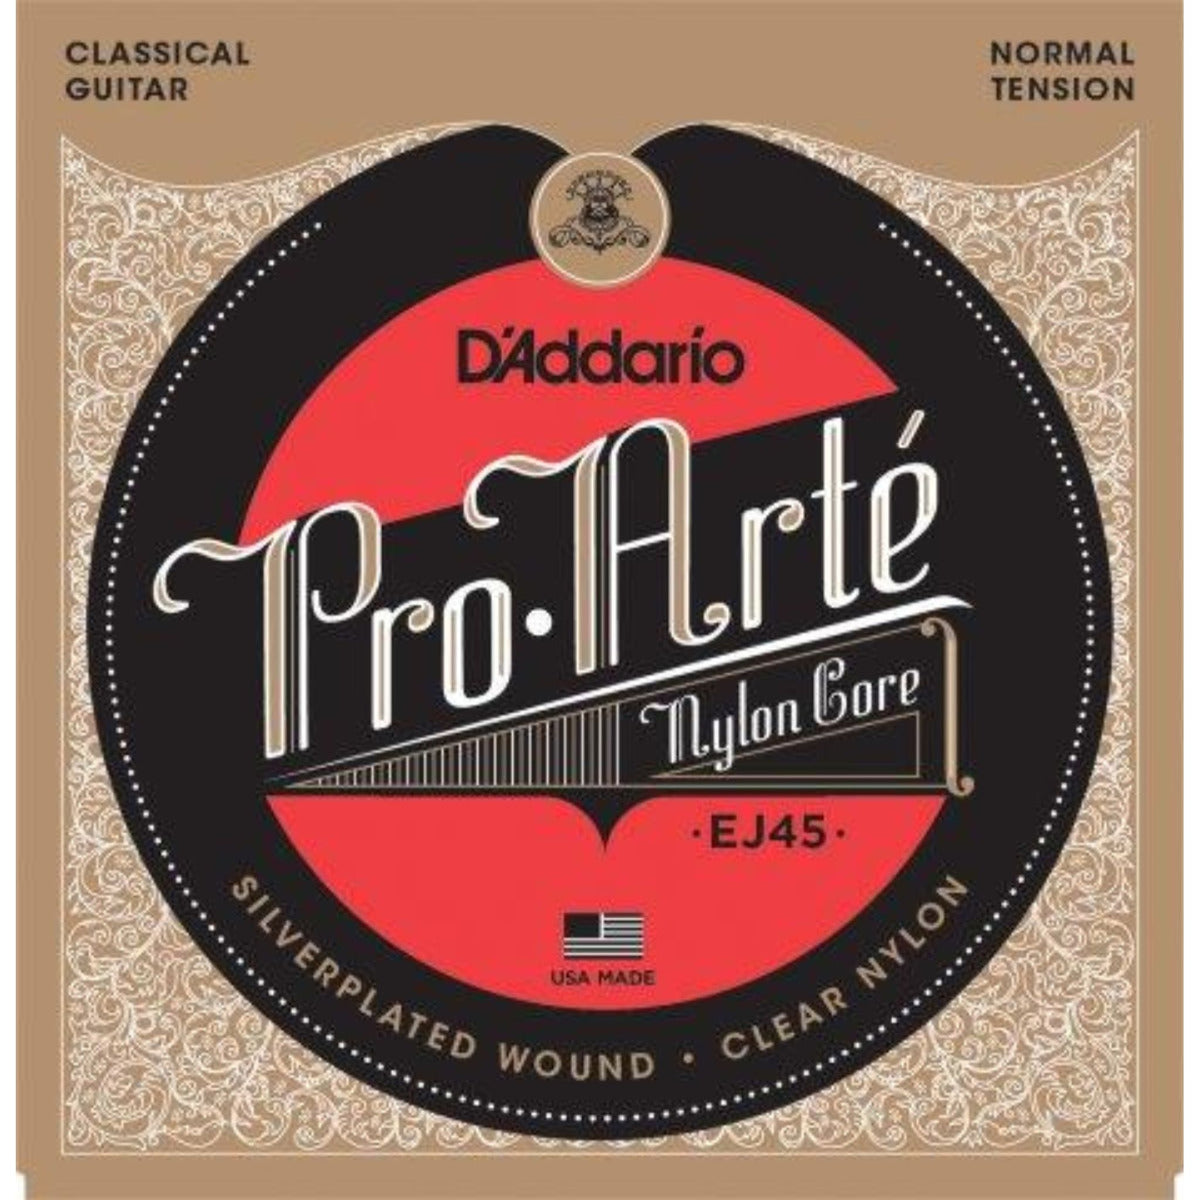 EJ45, normal tension, is D&#39;Addario&#39;s best selling classical set, preferred for its balance of rich tone, comfortable feel and dynamic projection.